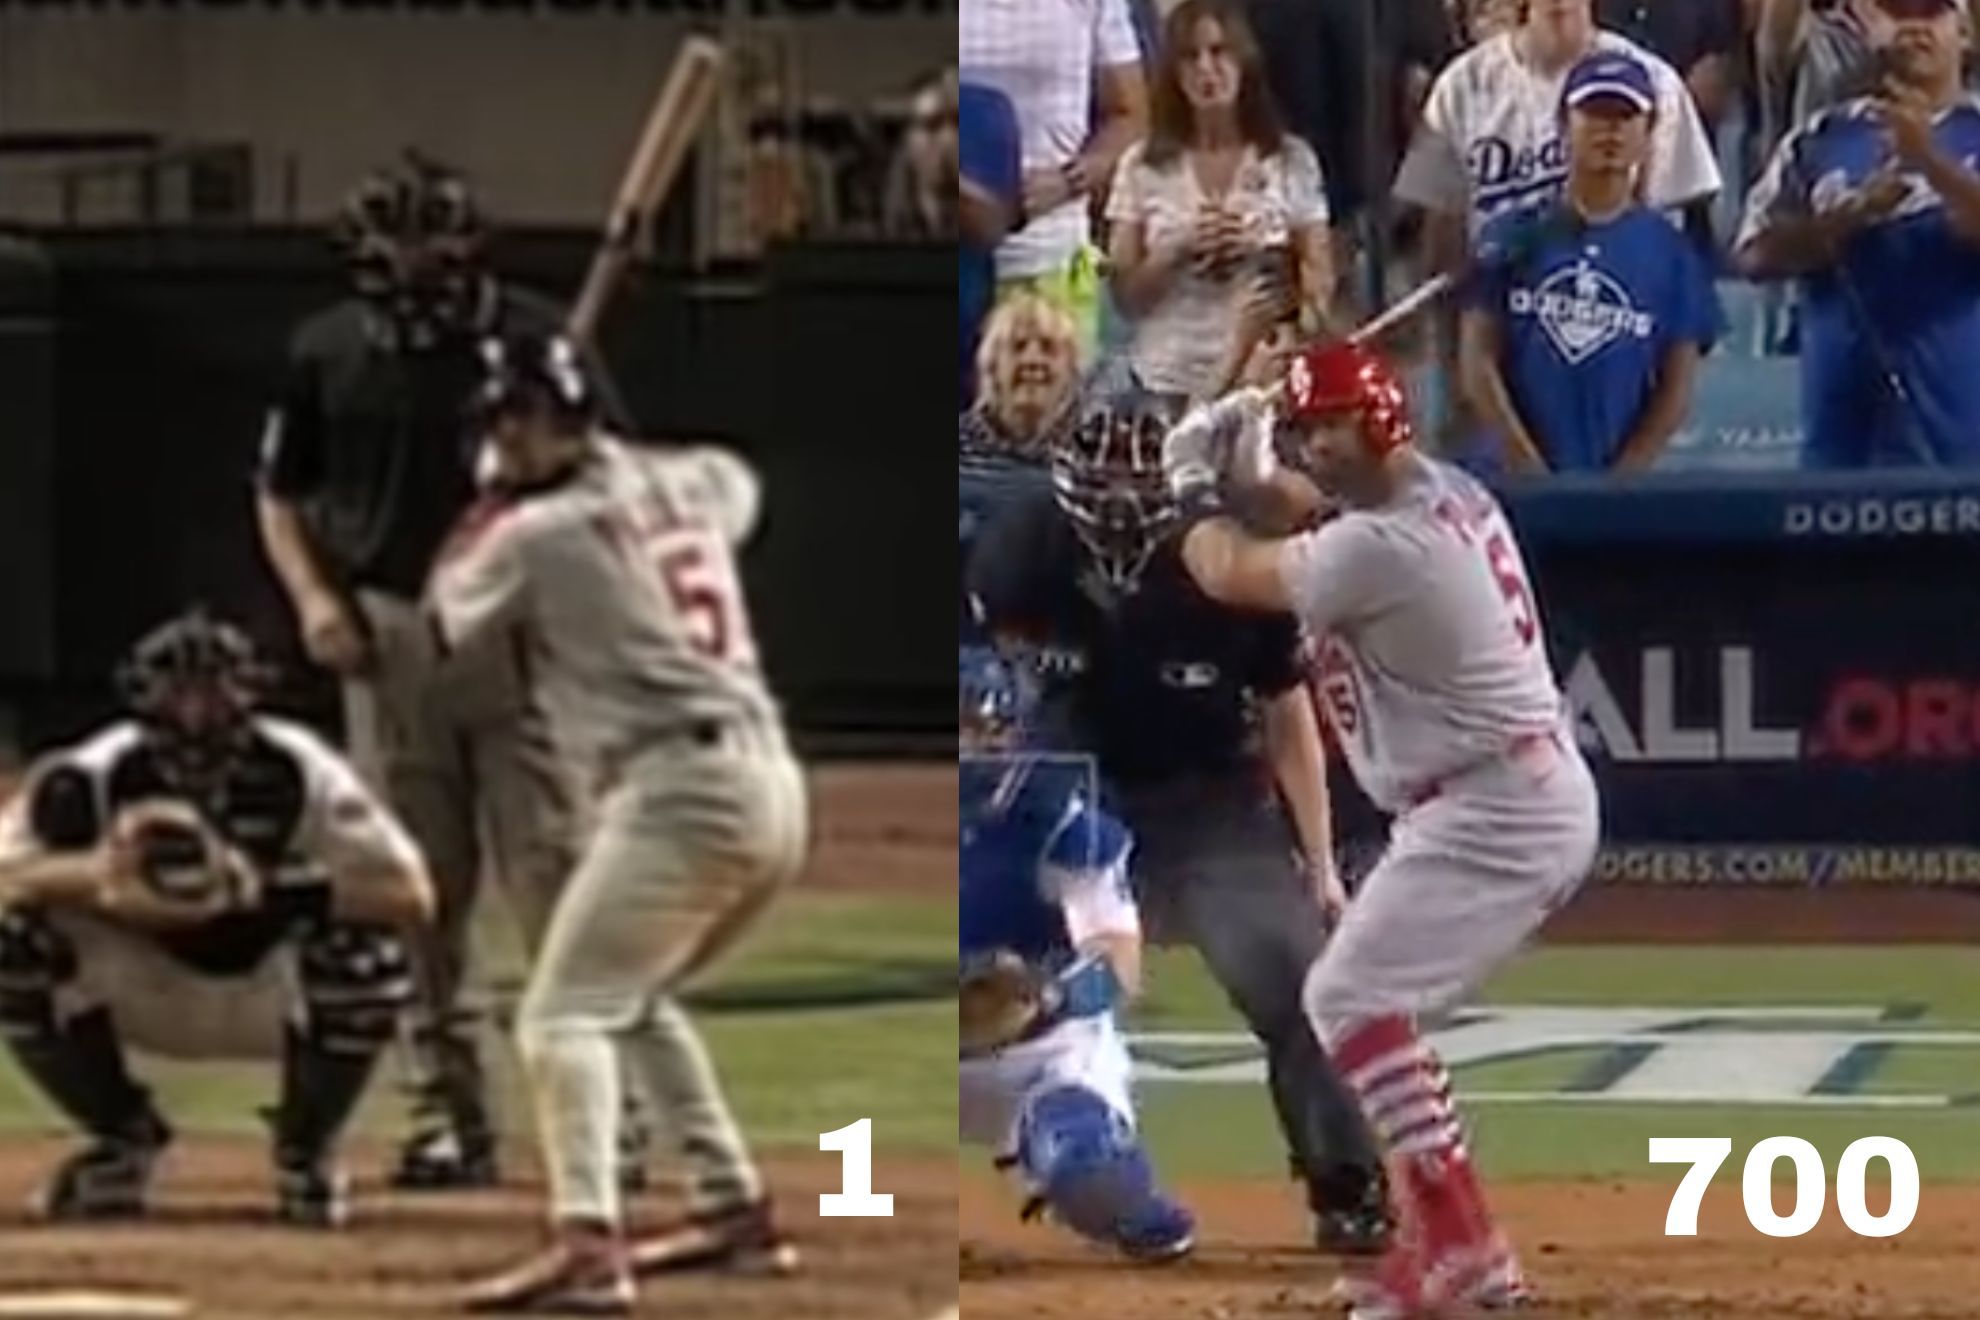 (Left) Albert Pujols at bat, seconds away from getting his first home run ever in the MLB. (Right) Pujols getting HR number 700 at Dodger Stadium. -MLB